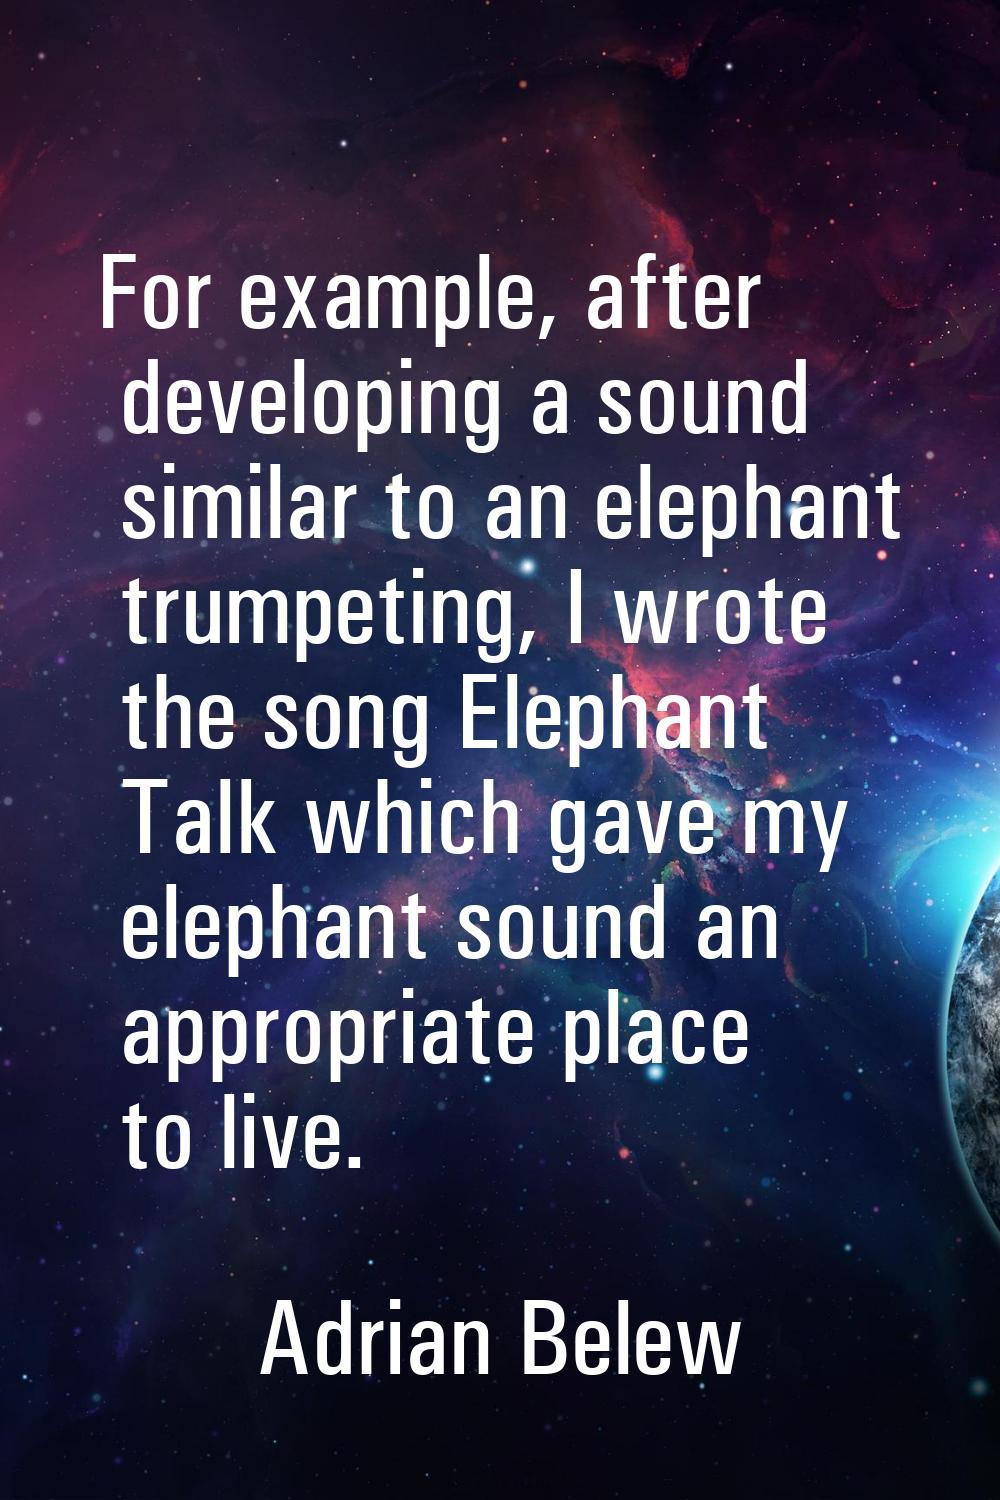 For example, after developing a sound similar to an elephant trumpeting, I wrote the song Elephant 